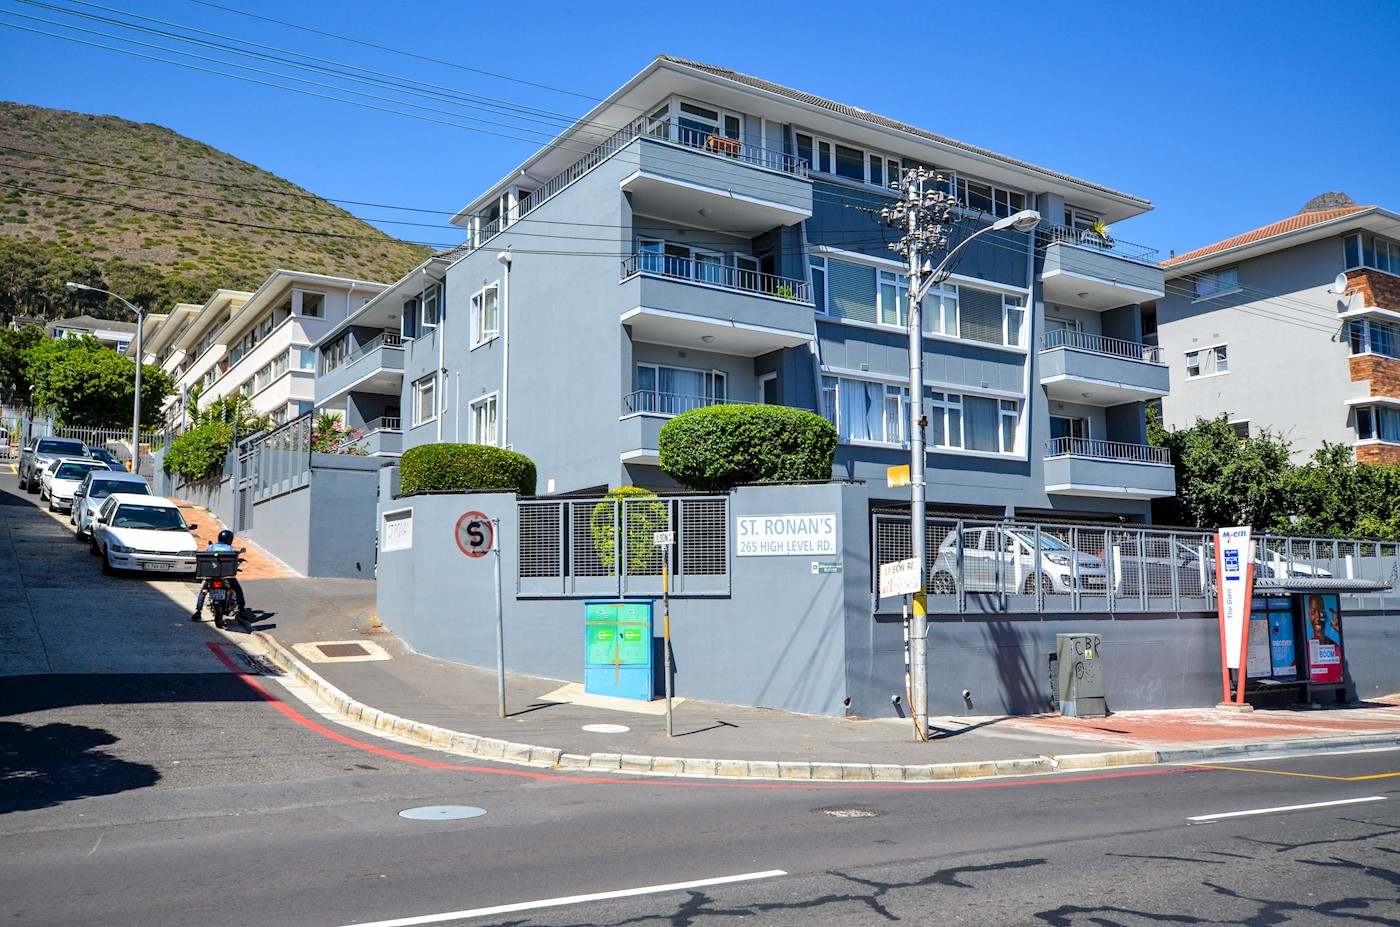 2 St Ronans, 265 High Level Road, Sea Point, Cape Town, Western Cape, South Africa 1/21